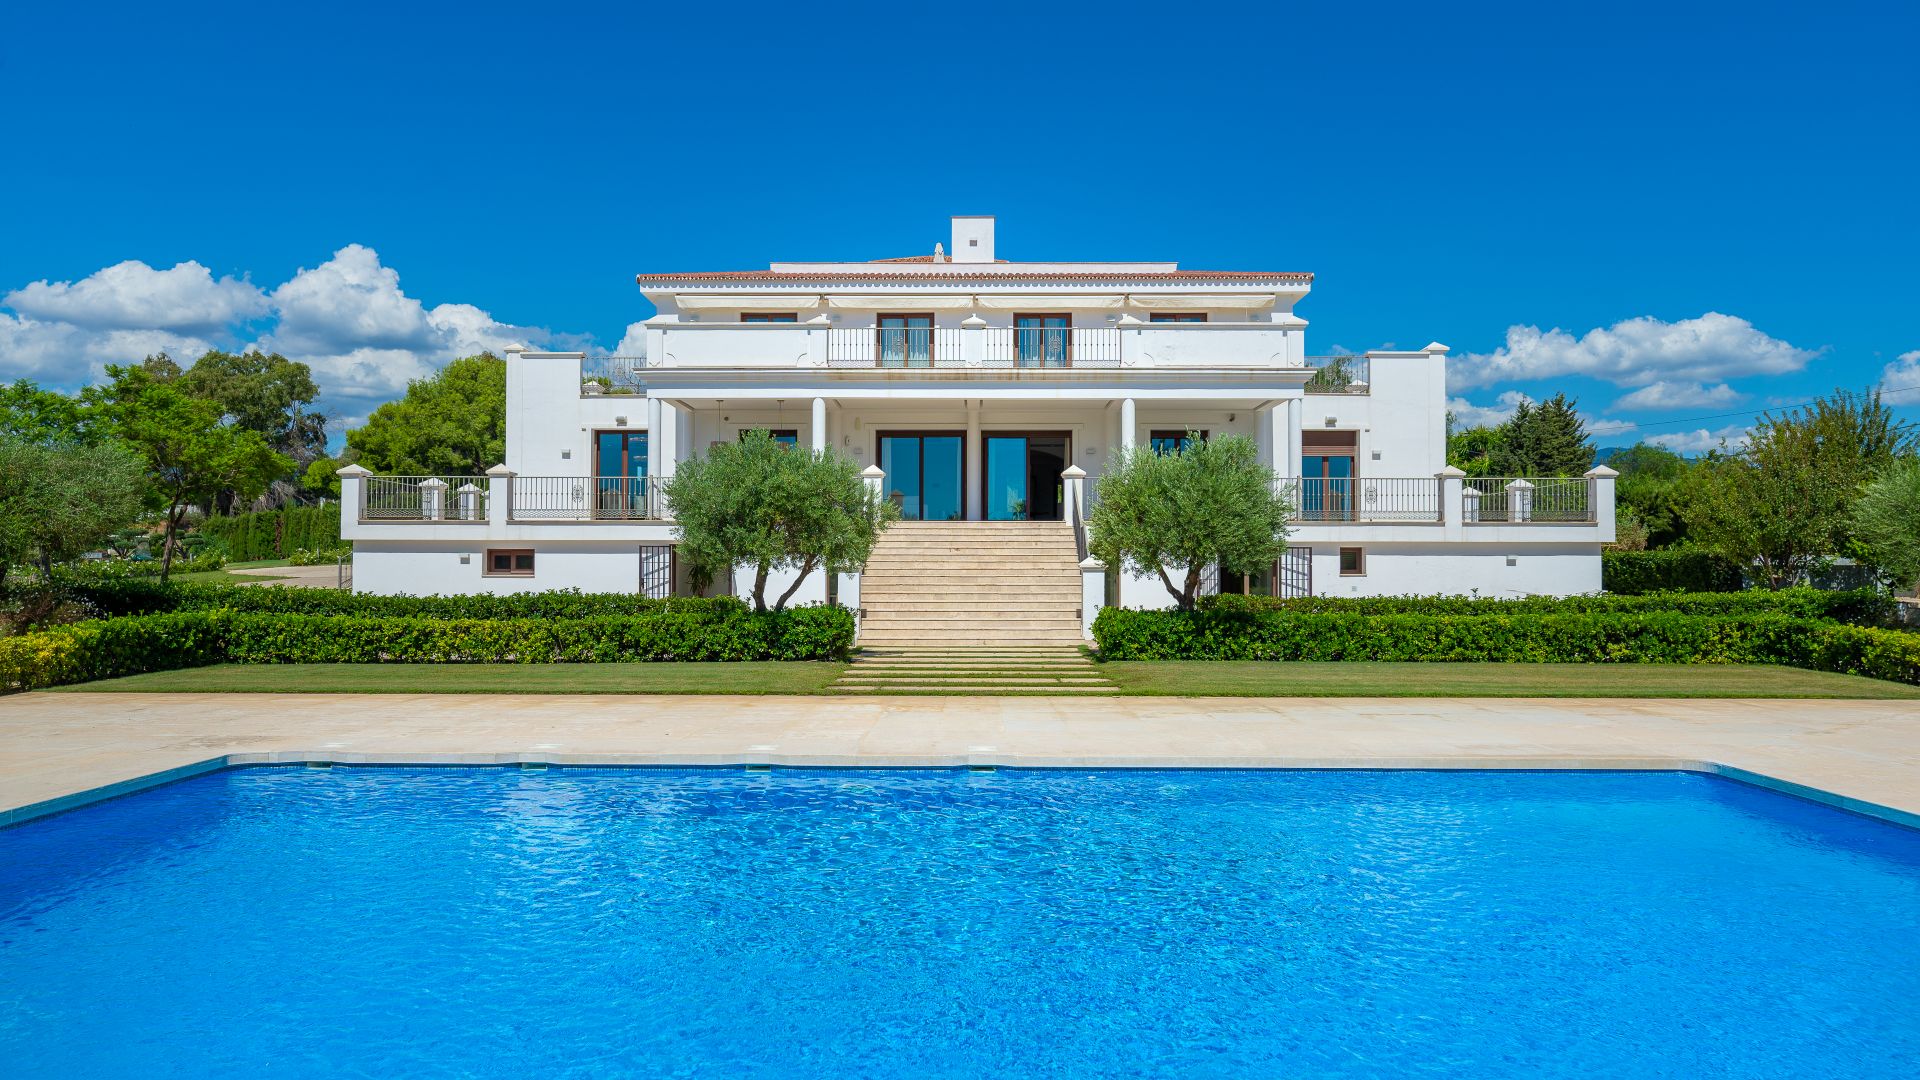 Stylish Mansion Situated on a Plot of over 24000m2 | Engel & Völkers Marbella